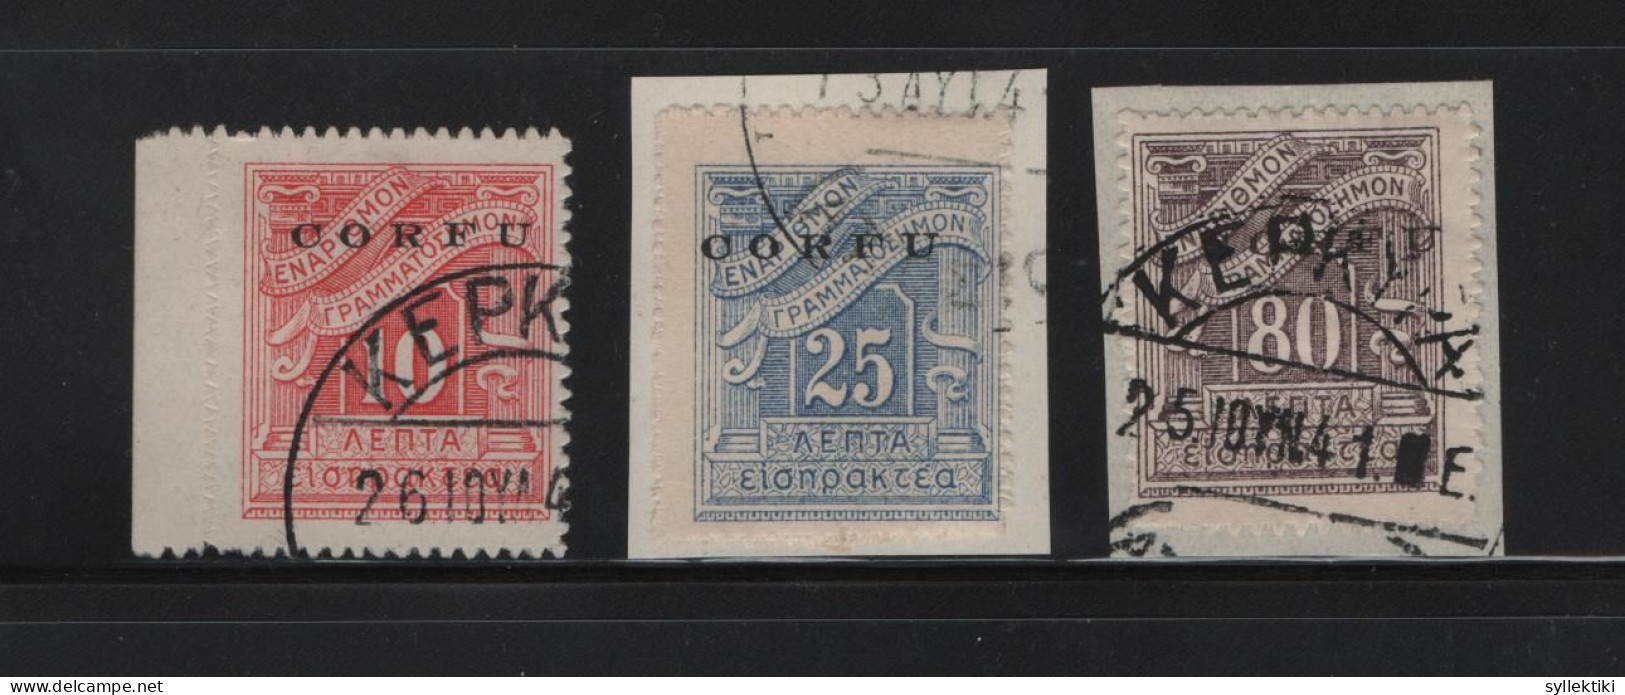 GREECE 1941 IONIAN ISLANDS OVERPRINTED CORFU ON 3 POSTAGE DUE USED STAMPS      HELLAS No 35 - 37 AND VALUE EURO 620.00 - Iles Ioniques